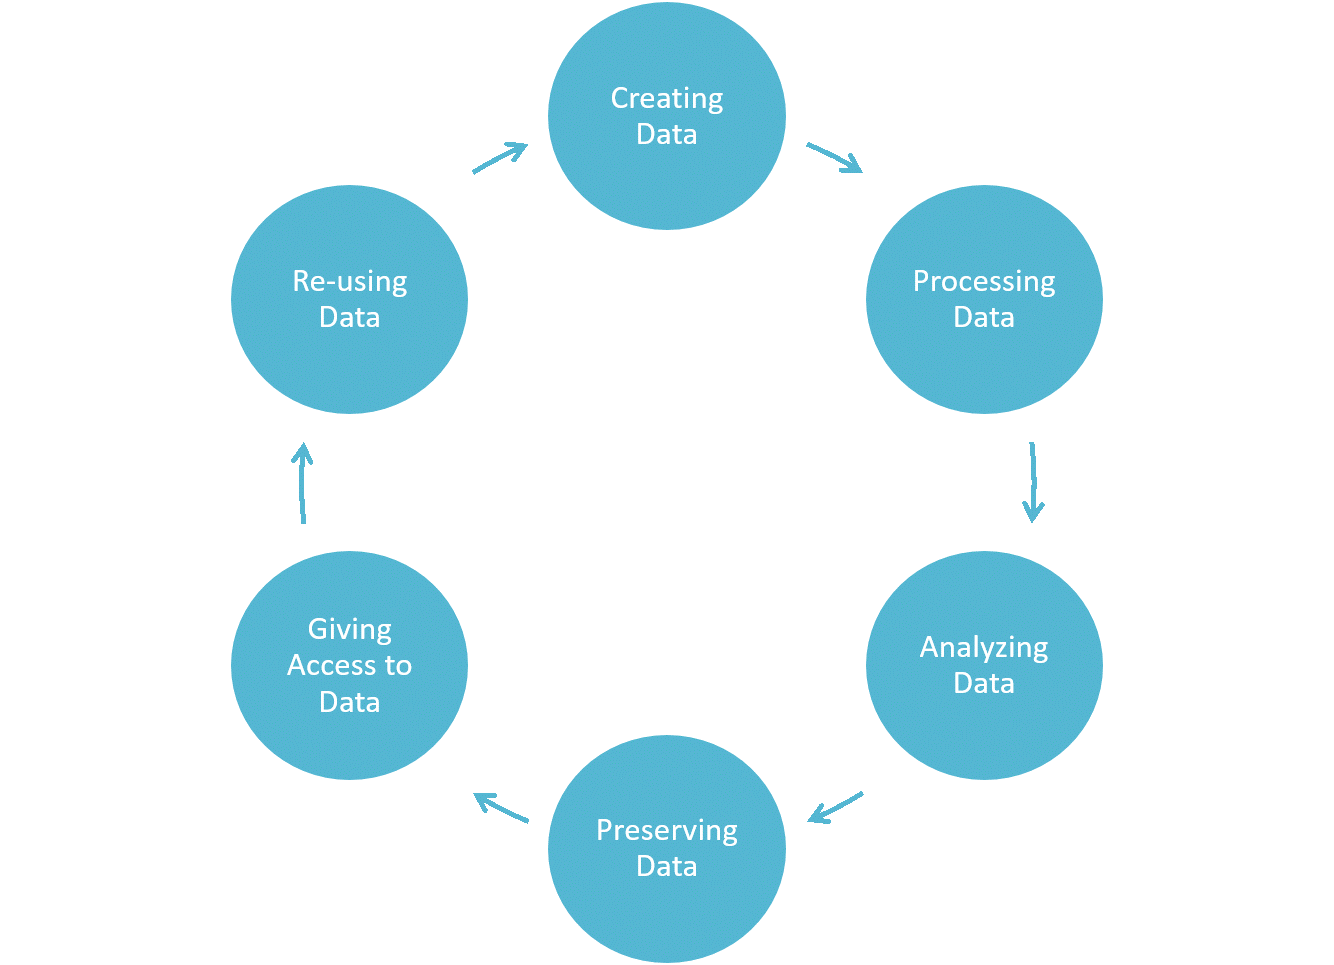 Image of the data lifecycle.